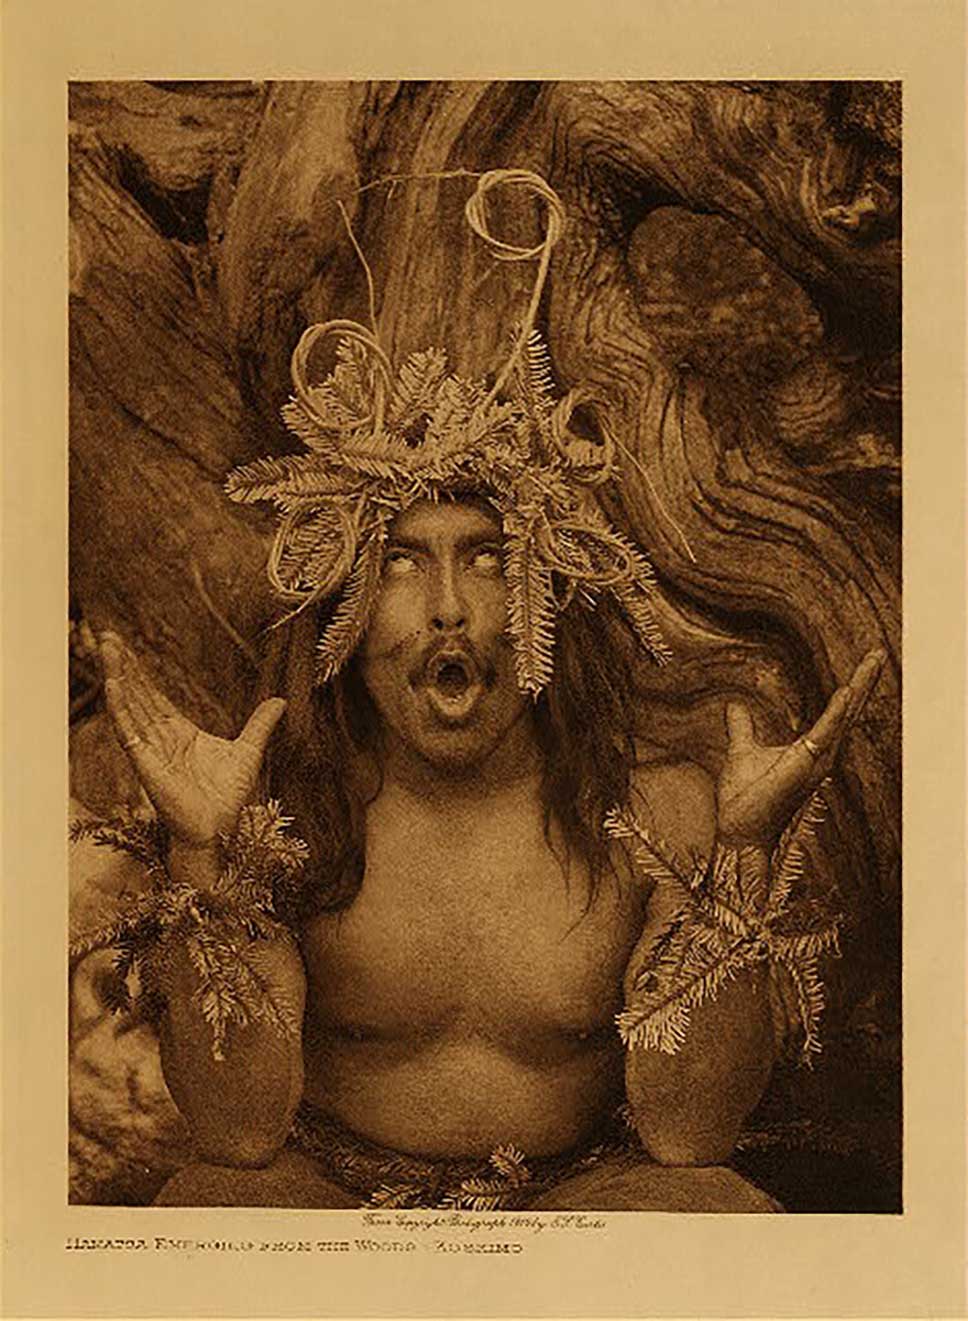 Sepia tone photograph by Edward Curtis of Wild HAMAT´SA DANCER, 1910, open mouth, eyes and hands turned skyward, cedar boughs